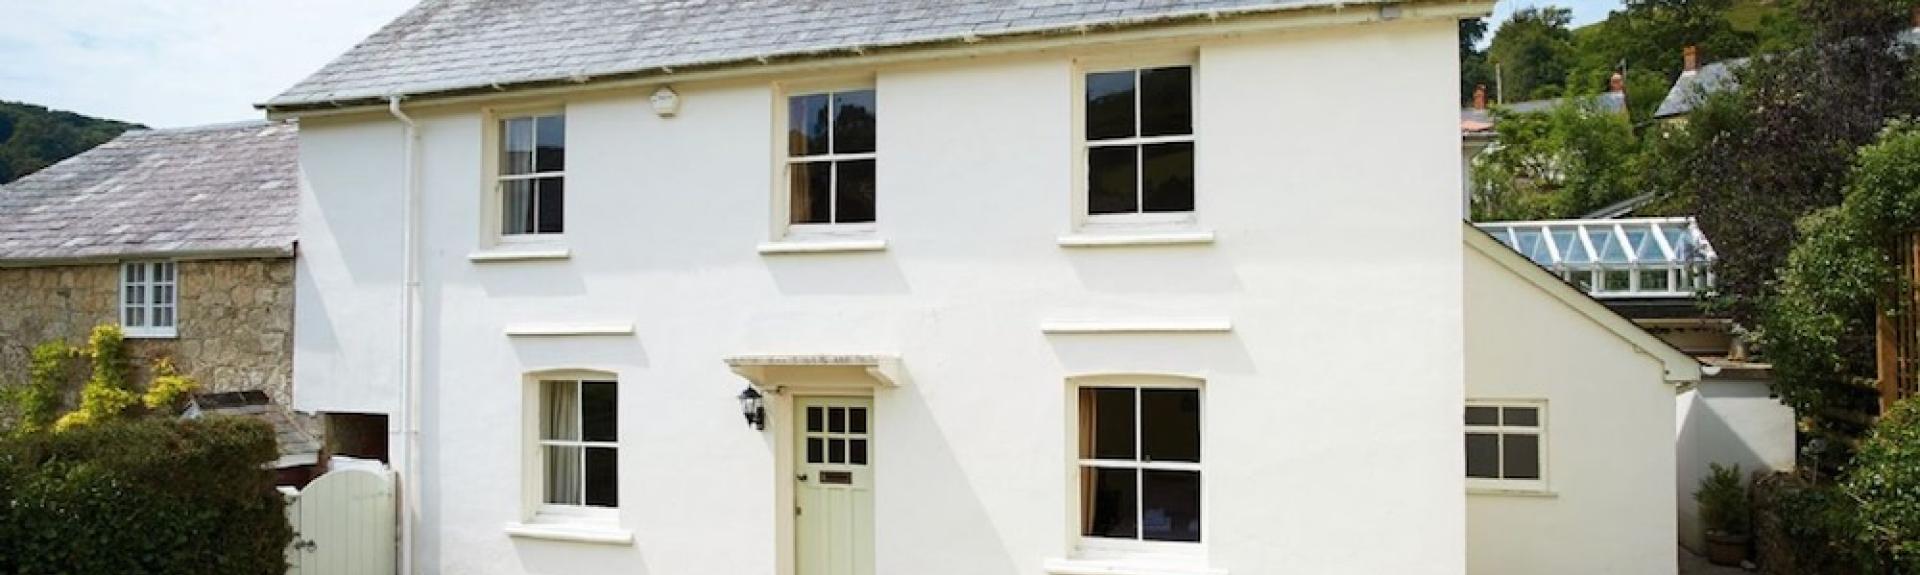 A double-fronted East Devon holiday cottage in front of a secure lawned garden.